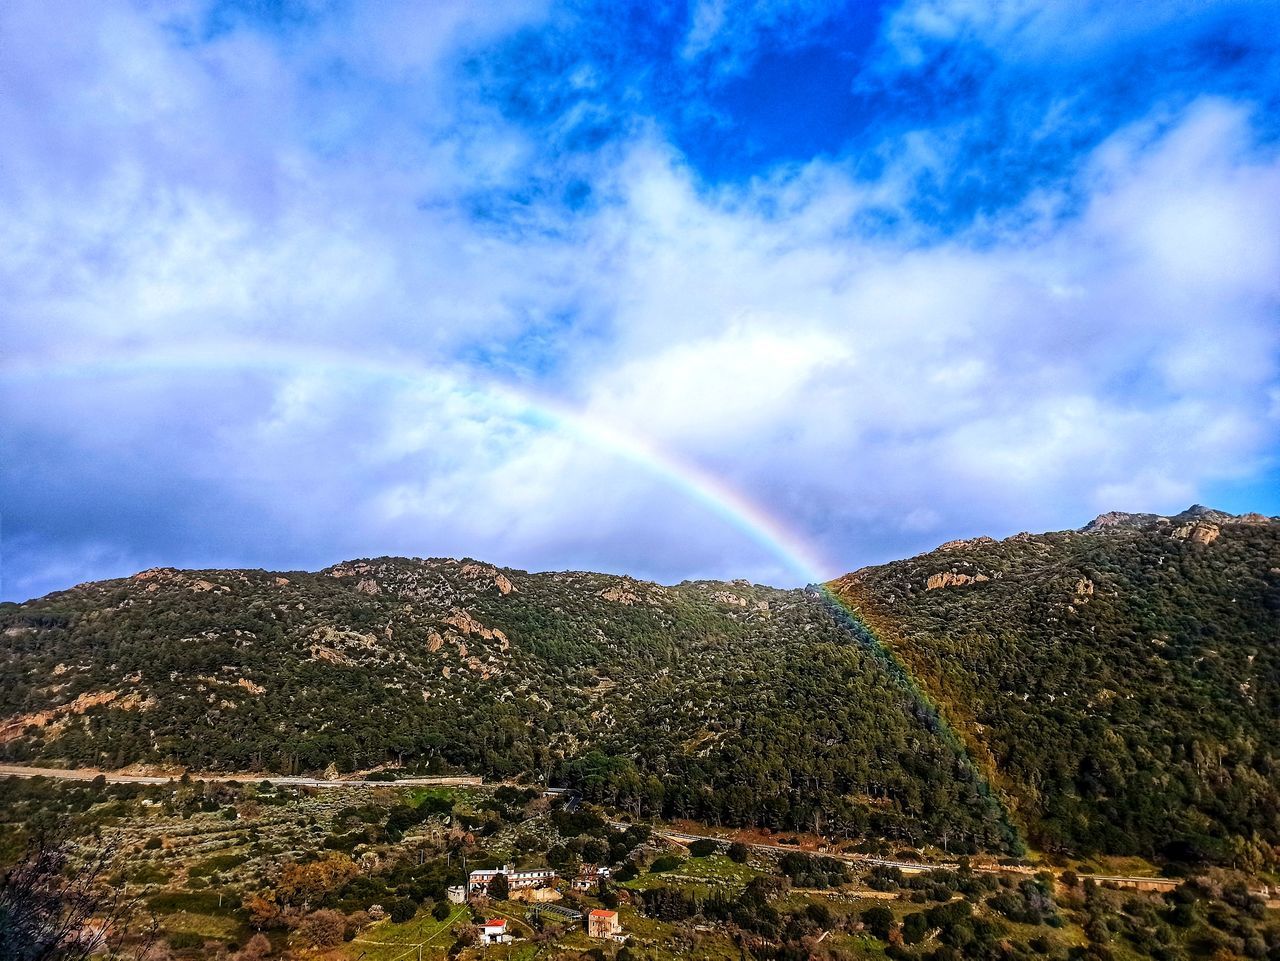 SCENIC VIEW OF RAINBOW OVER MOUNTAIN AGAINST SKY